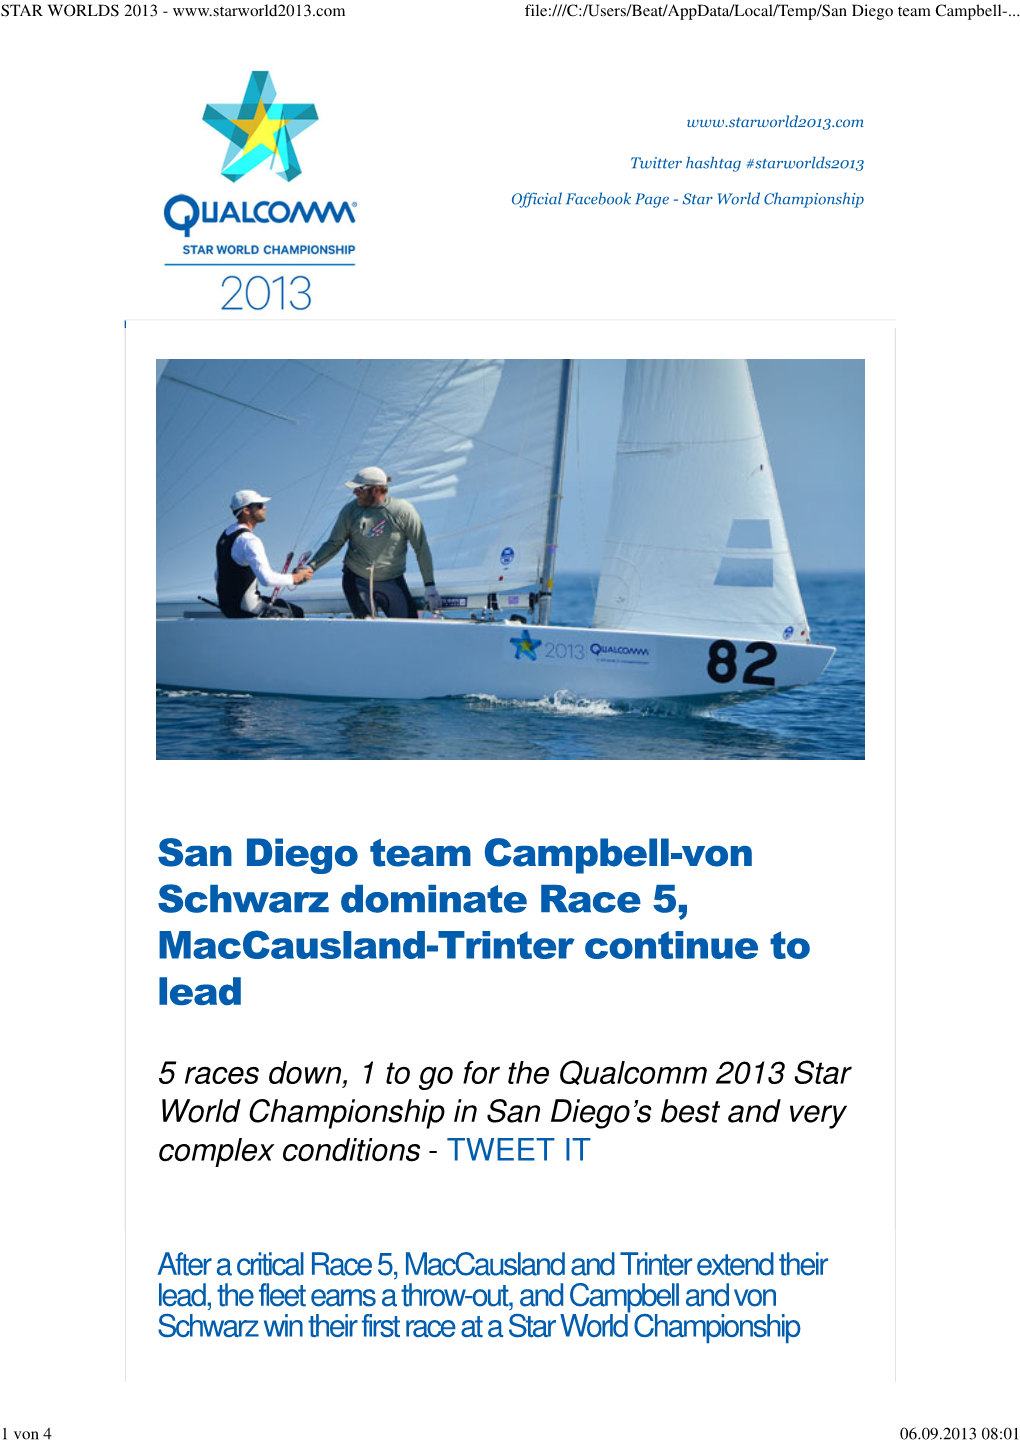 STAR WORLDS 2013 - File:///C:/Users/Beat/Appdata/Local/Temp/San Diego Team Campbell